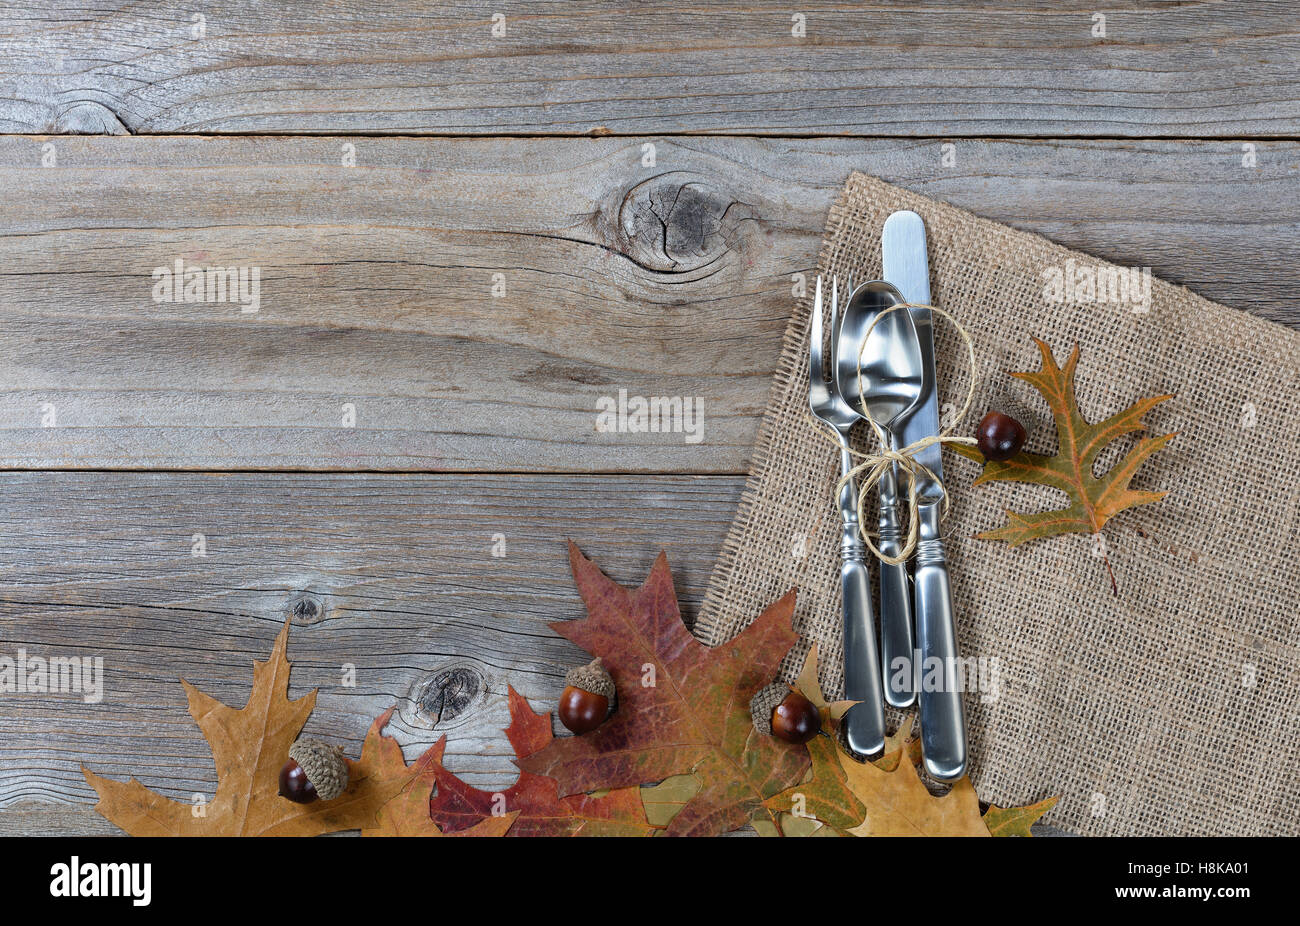 Fall dinner place setting for Thanksgiving holiday in horizontal layout on rustic wooden boards. Stock Photo